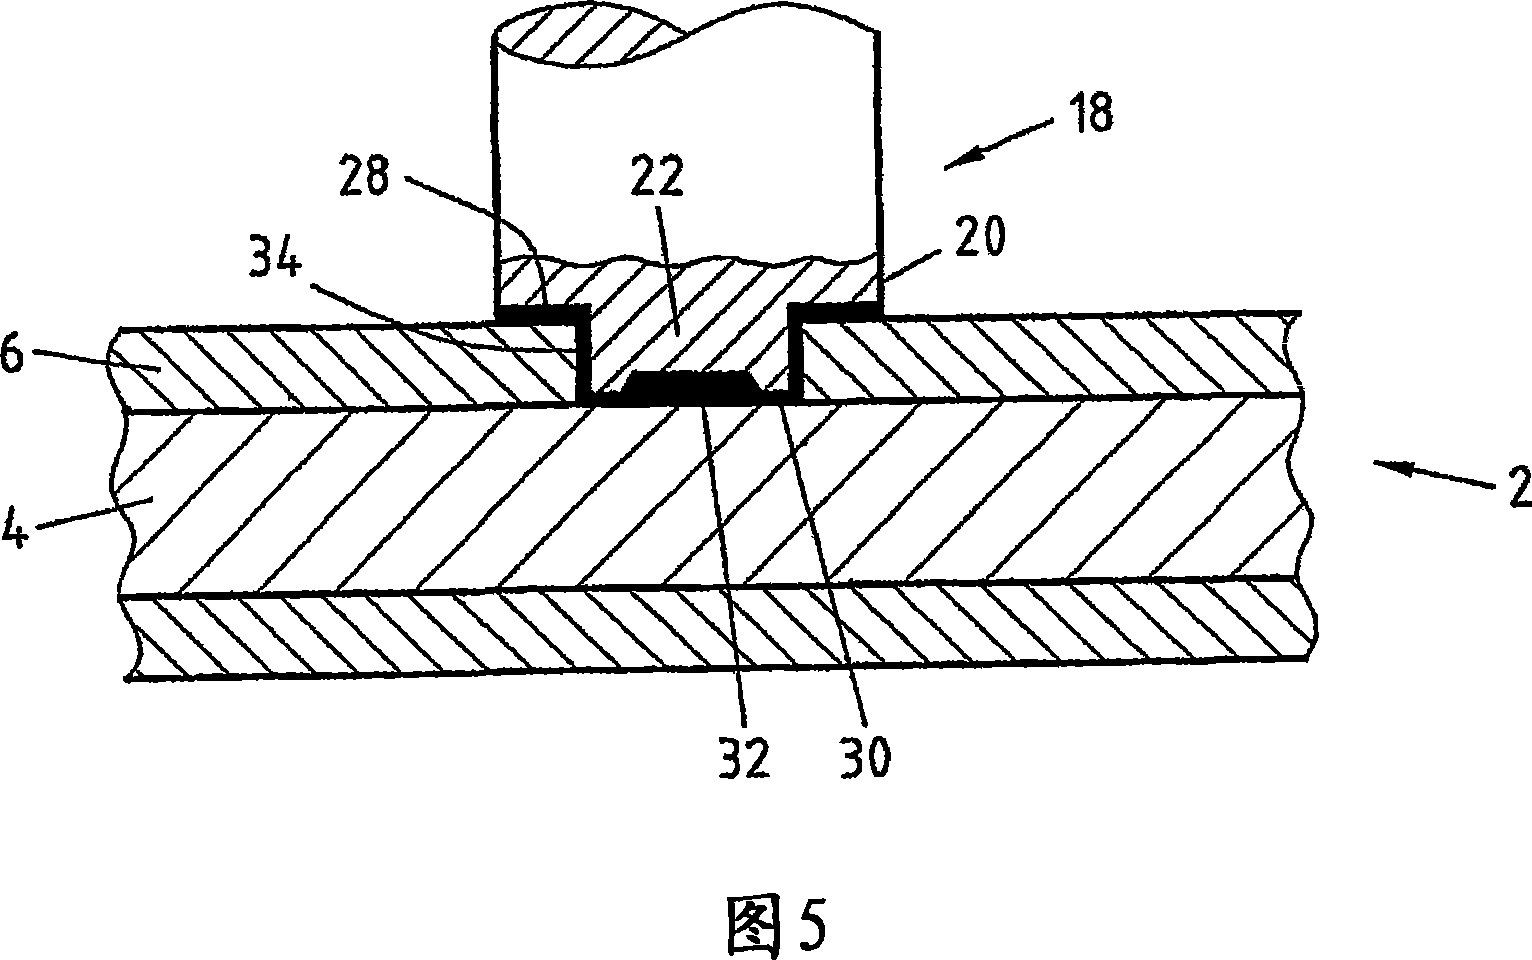 Multilayered electrical flat conductor